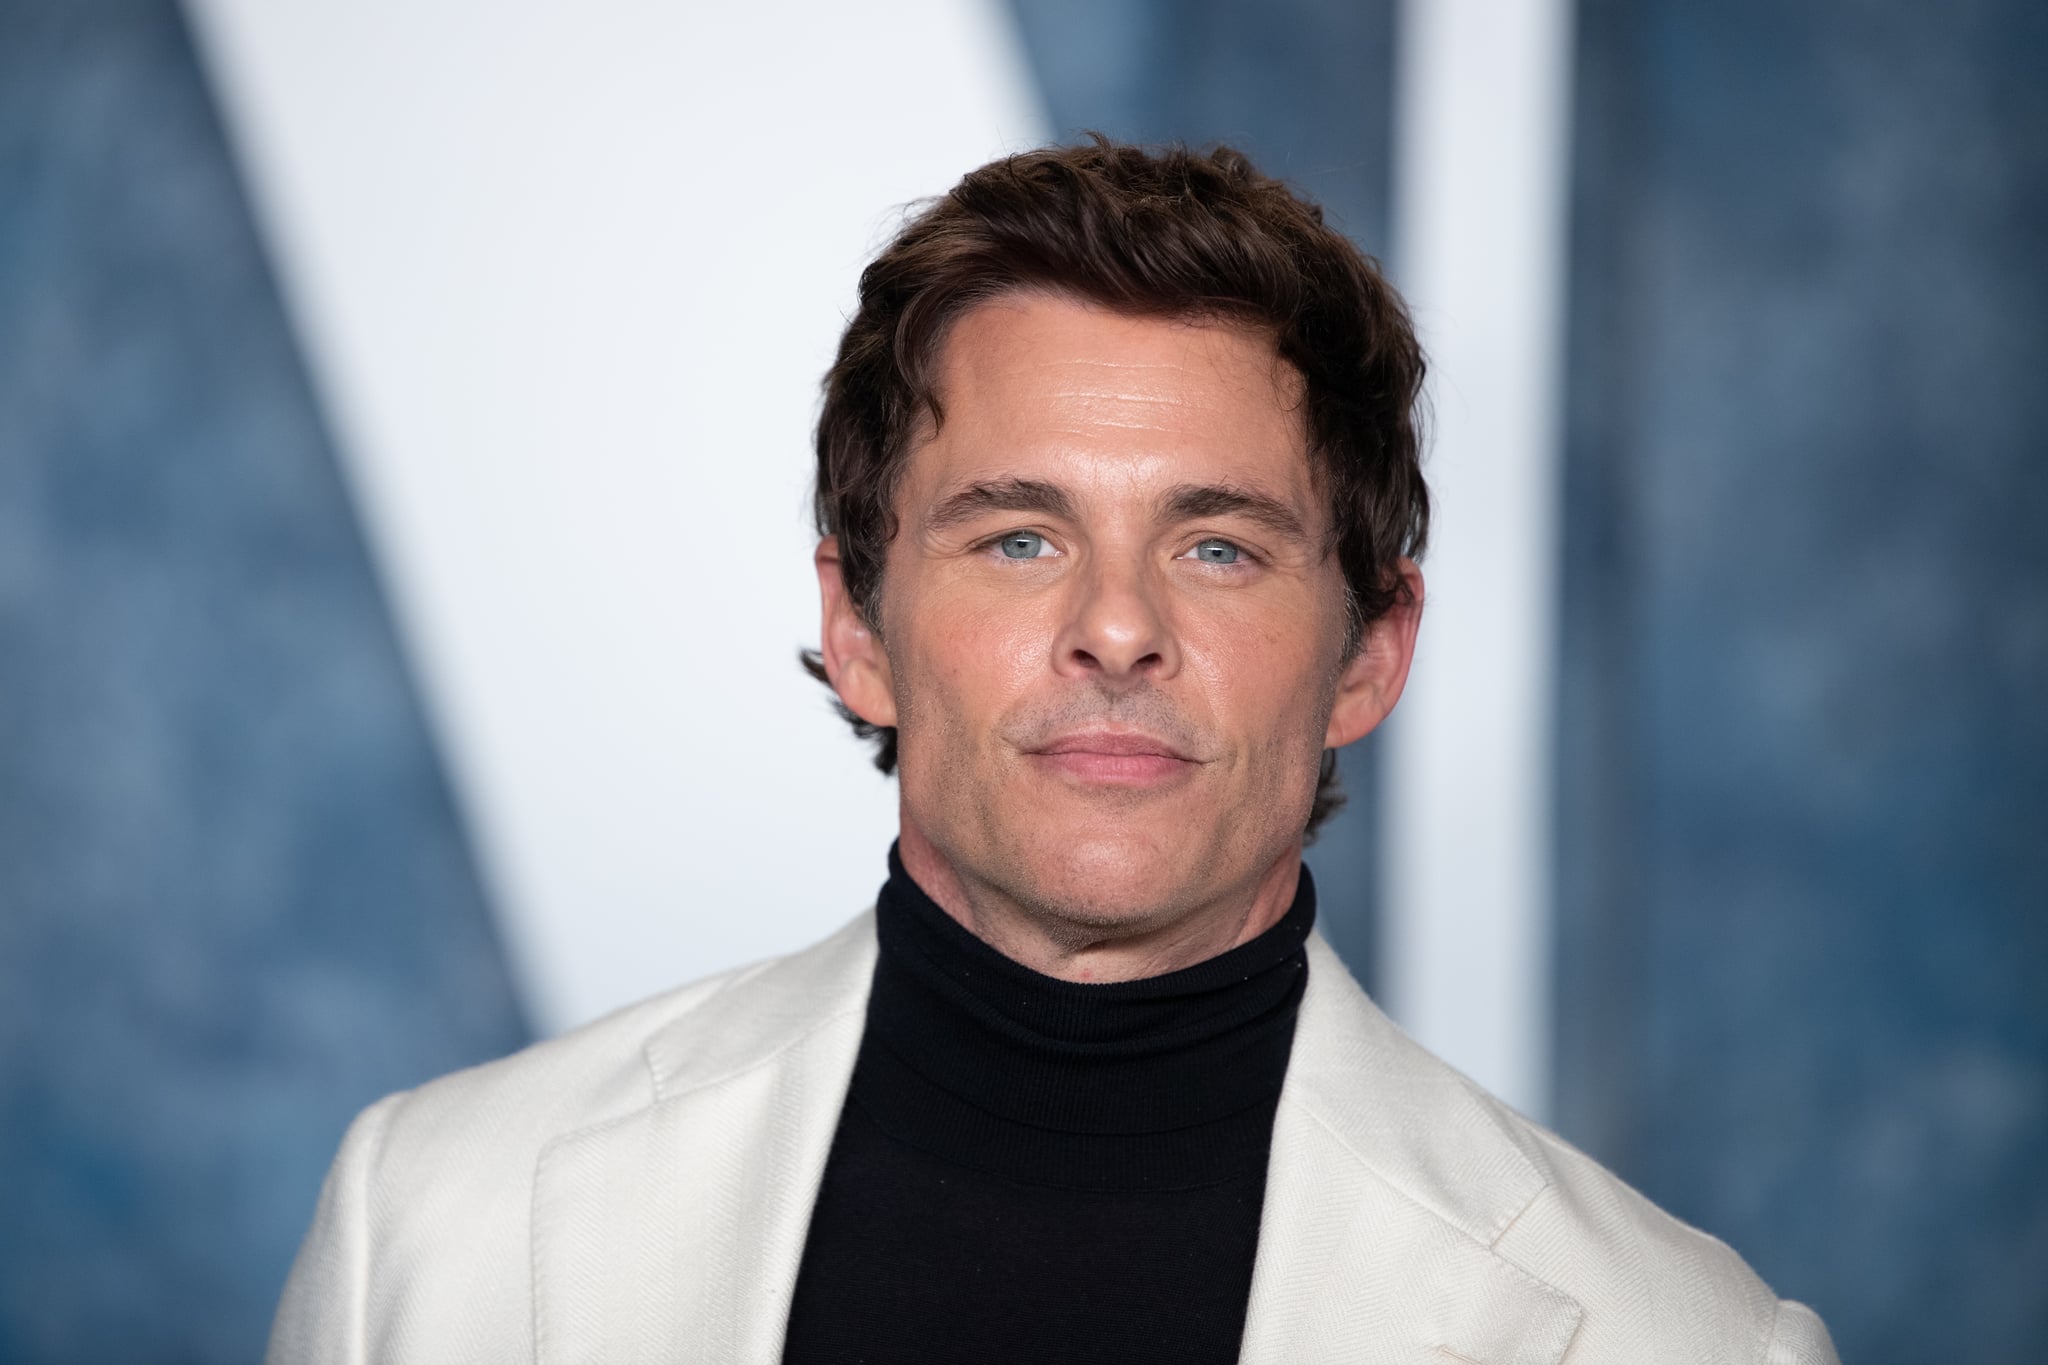 BEVERLY HILLS, CALIFORNIA - MARCH 12: James Marsden attends the 2023 Vanity Fair Oscar Party hosted by Radhika Jones at Wallis Annenberg Center for the Performing Arts on March 12, 2023 in Beverly Hills, California. (Photo by Robert Smith/Patrick McMullan via Getty Images)